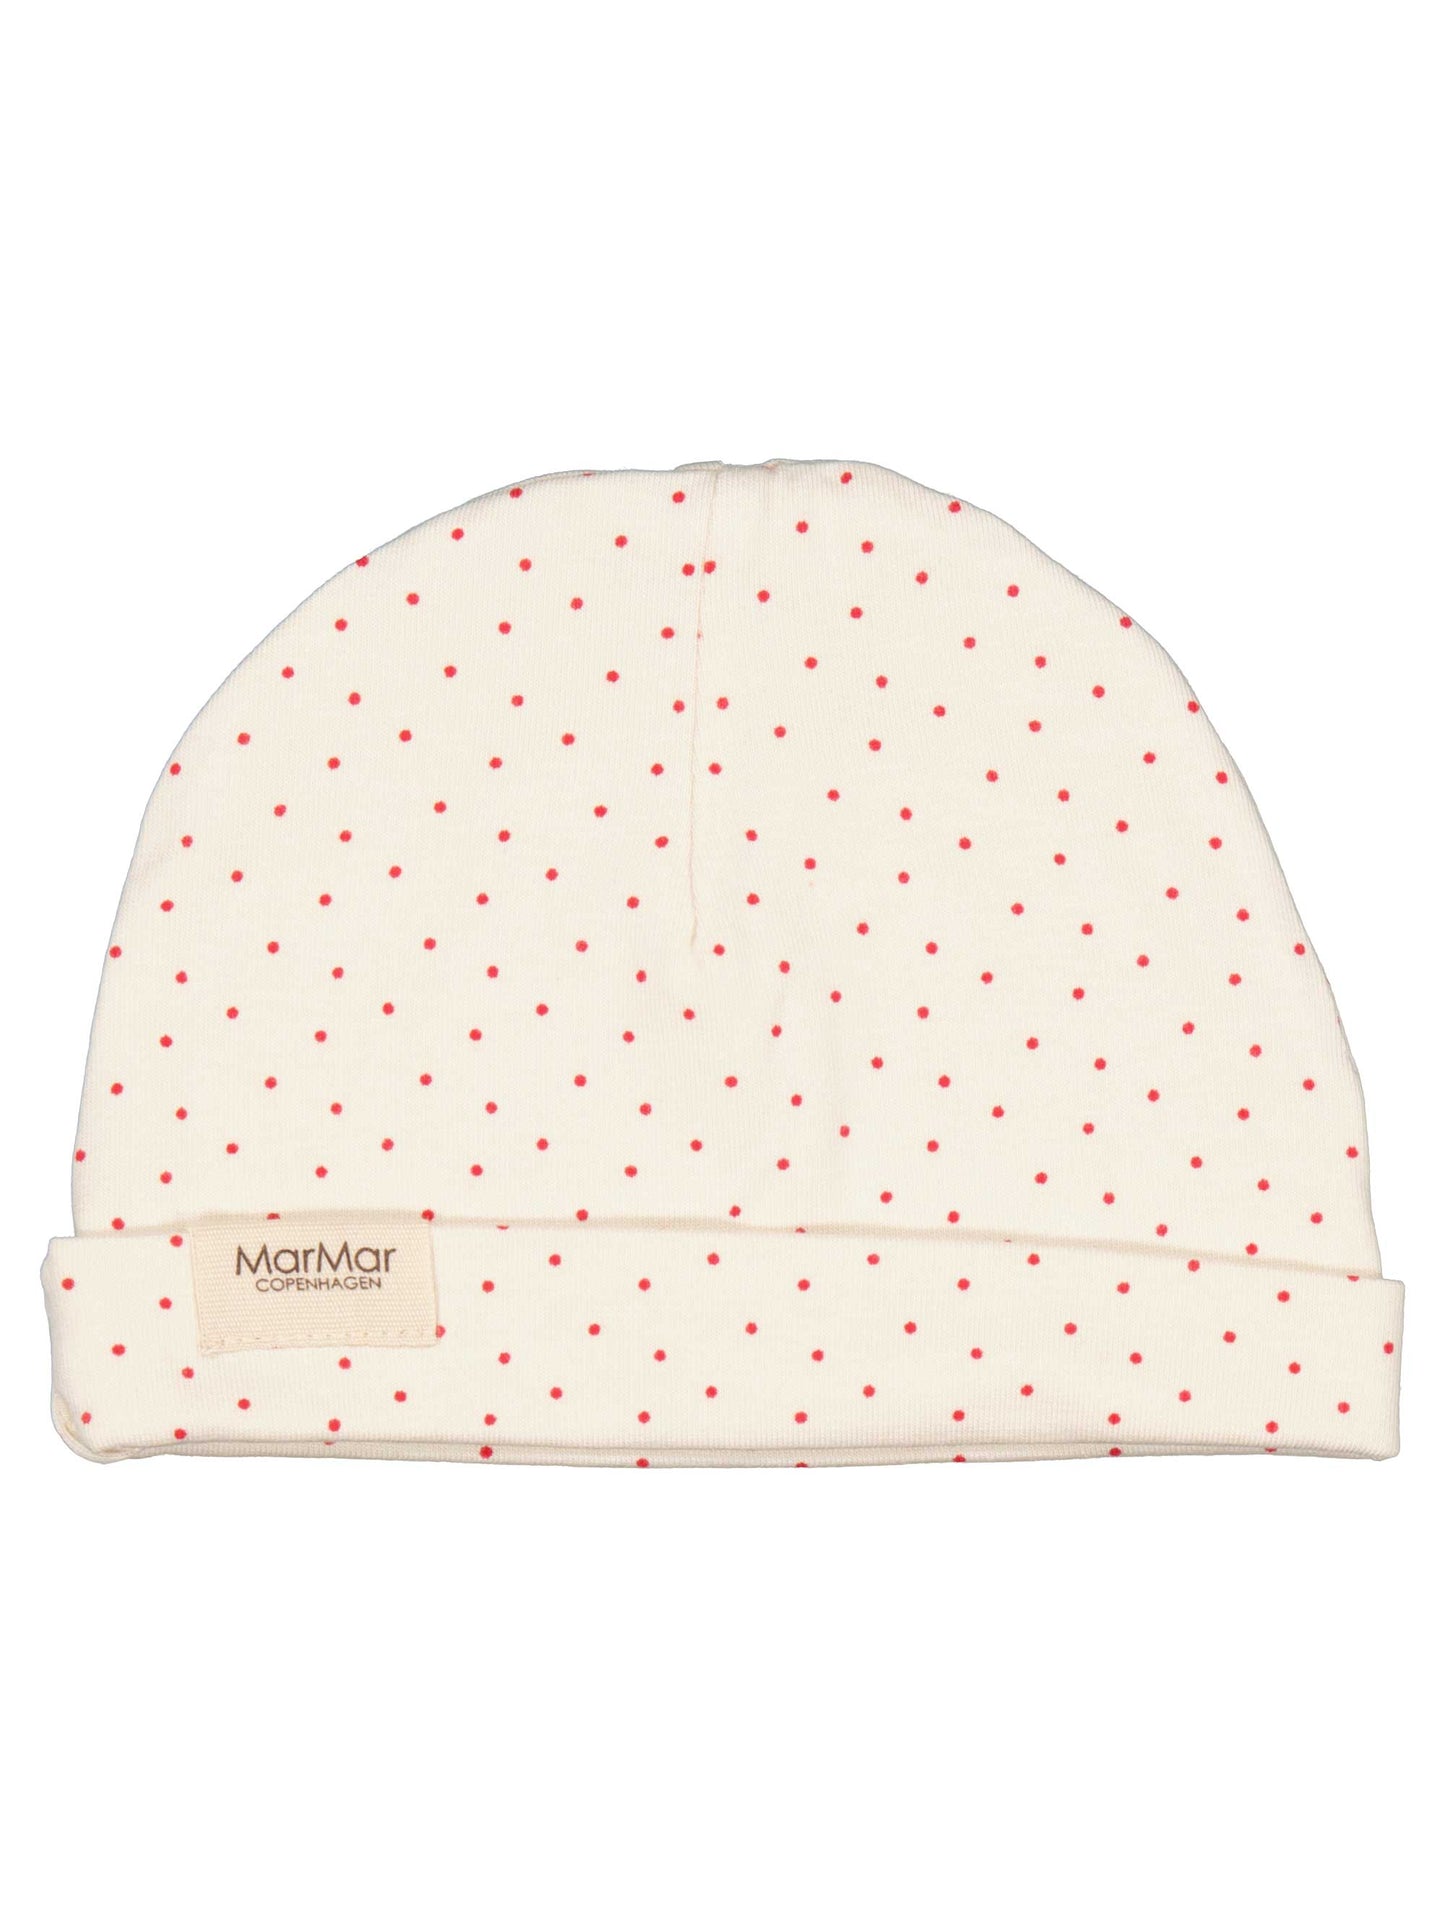 Red Currant Dot Baby Hat